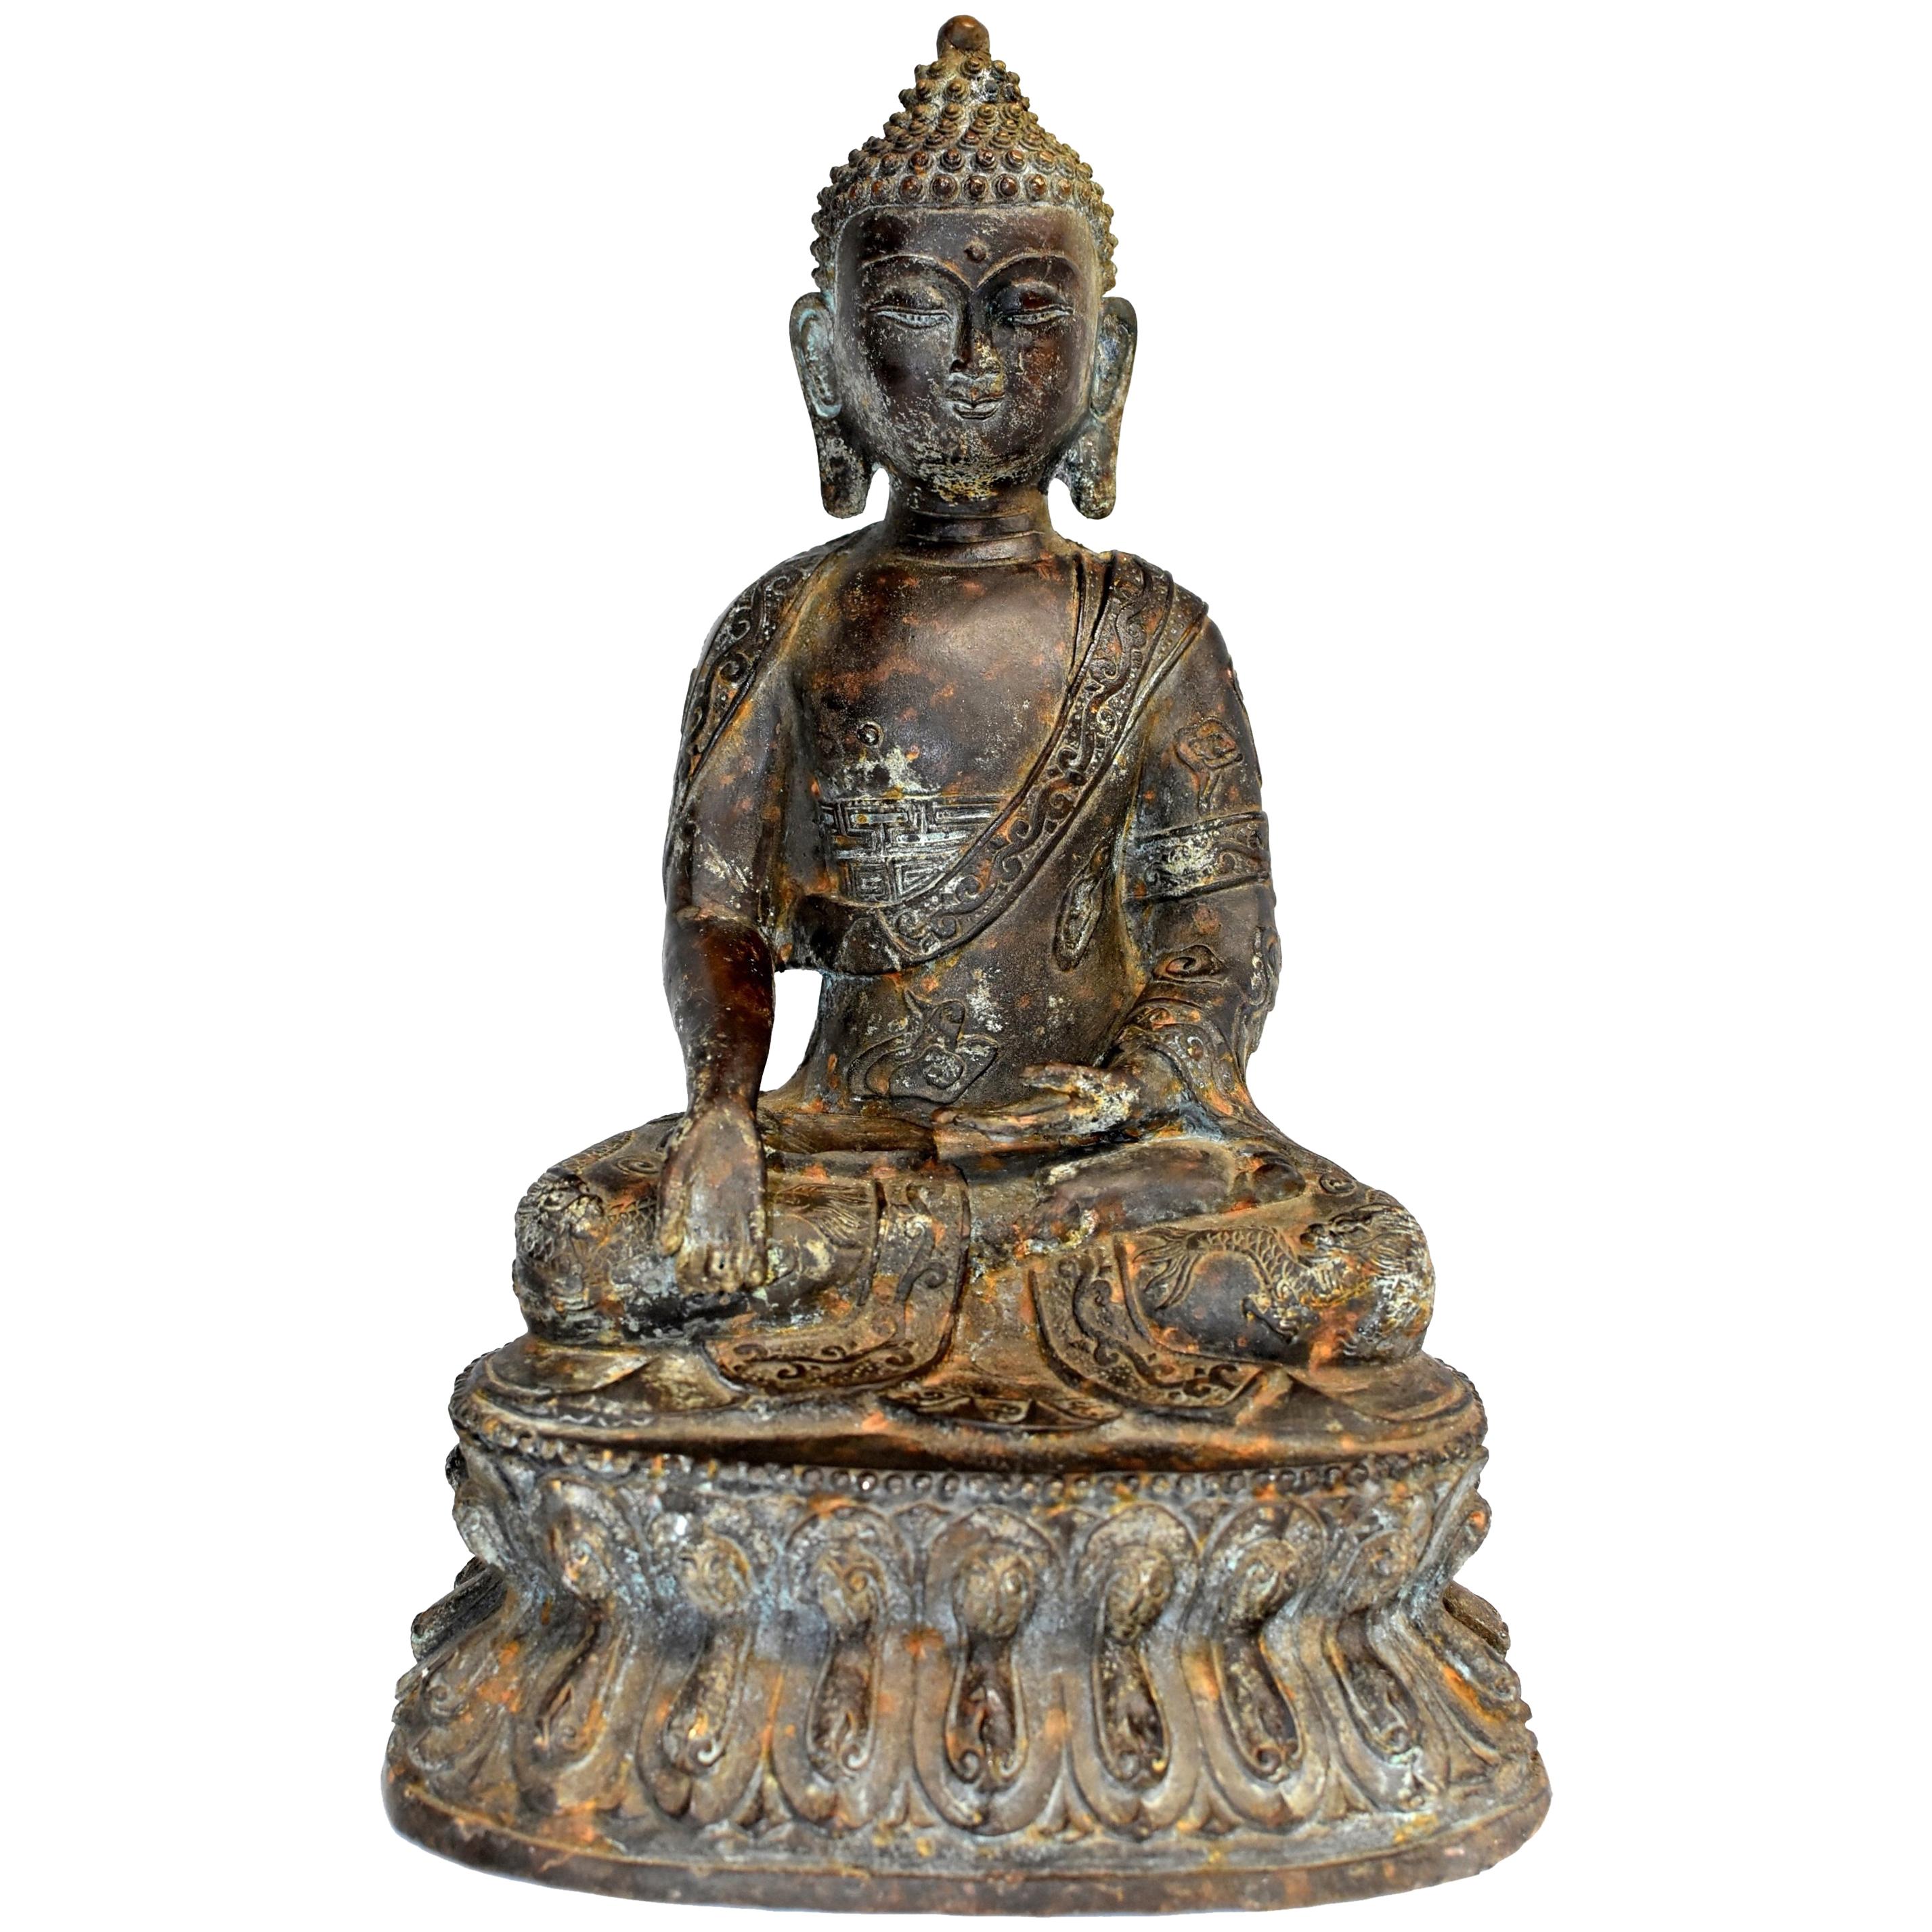 Antique Bronze Buddha, Charity and Compassion